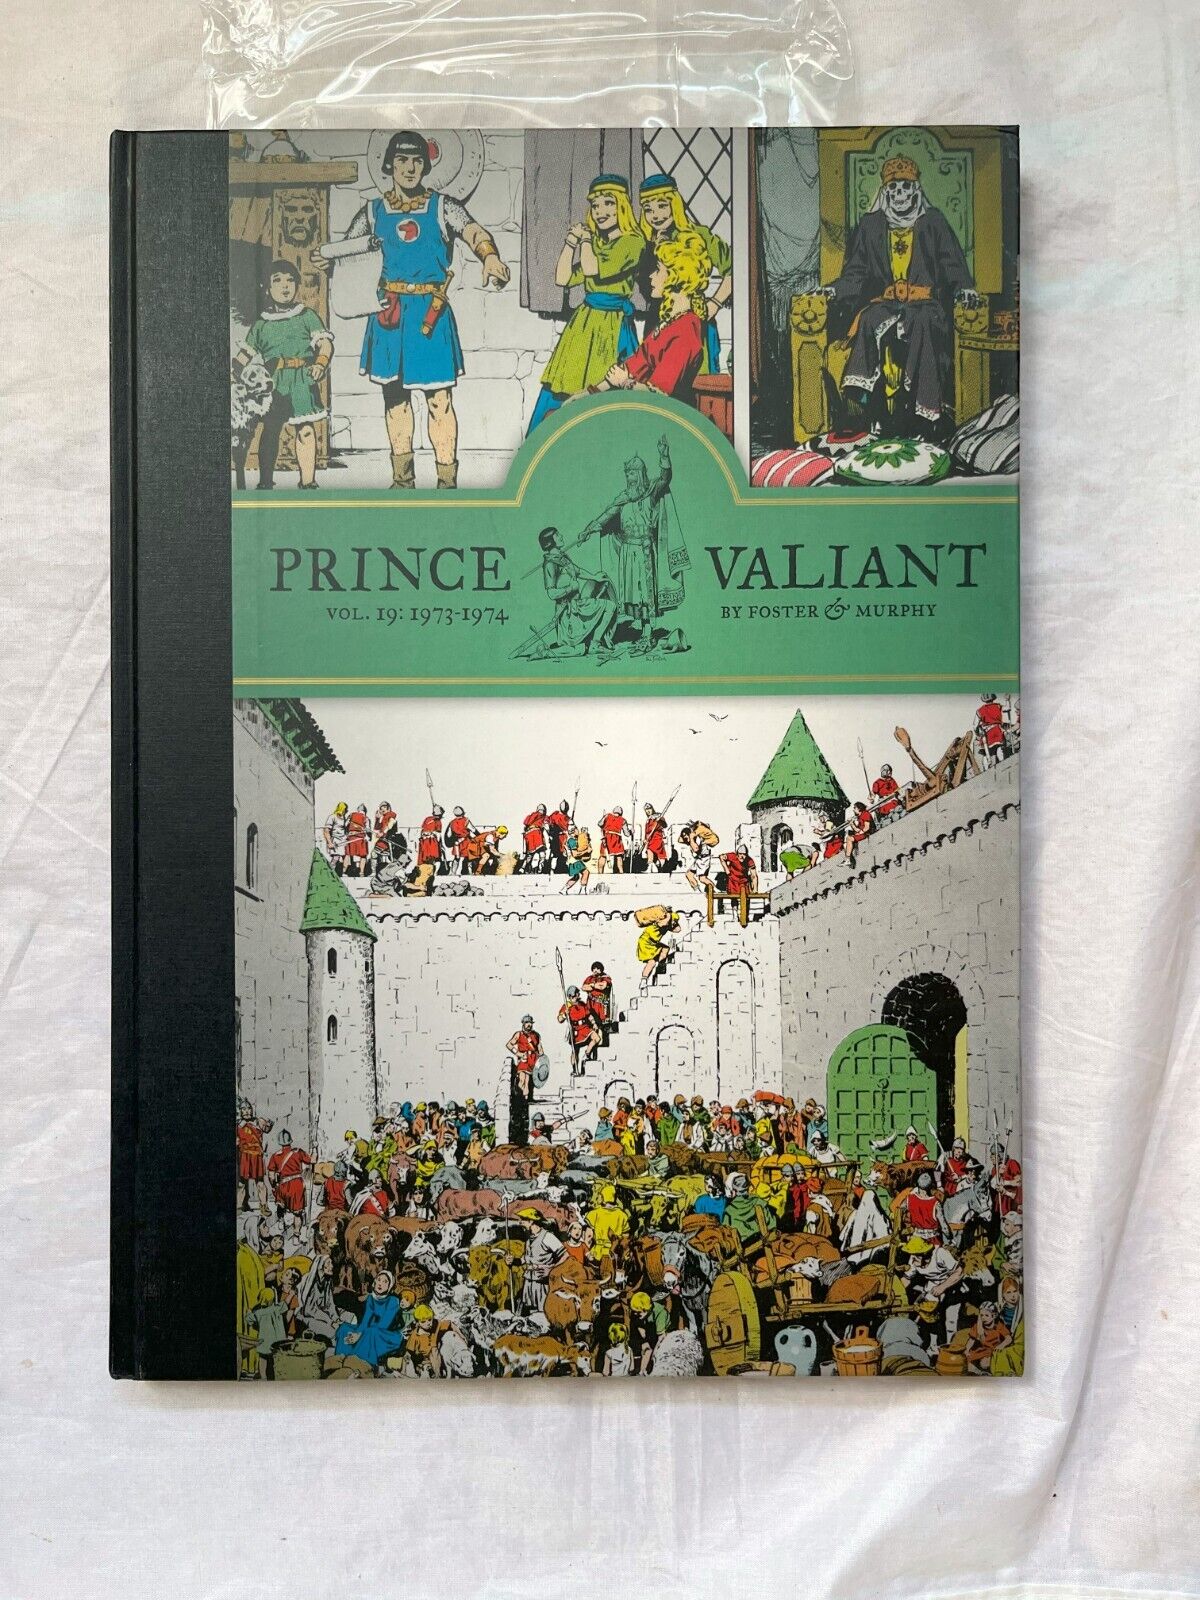 Prince Valiant Vol. 19: 1973-1974 by Foster & Murphy